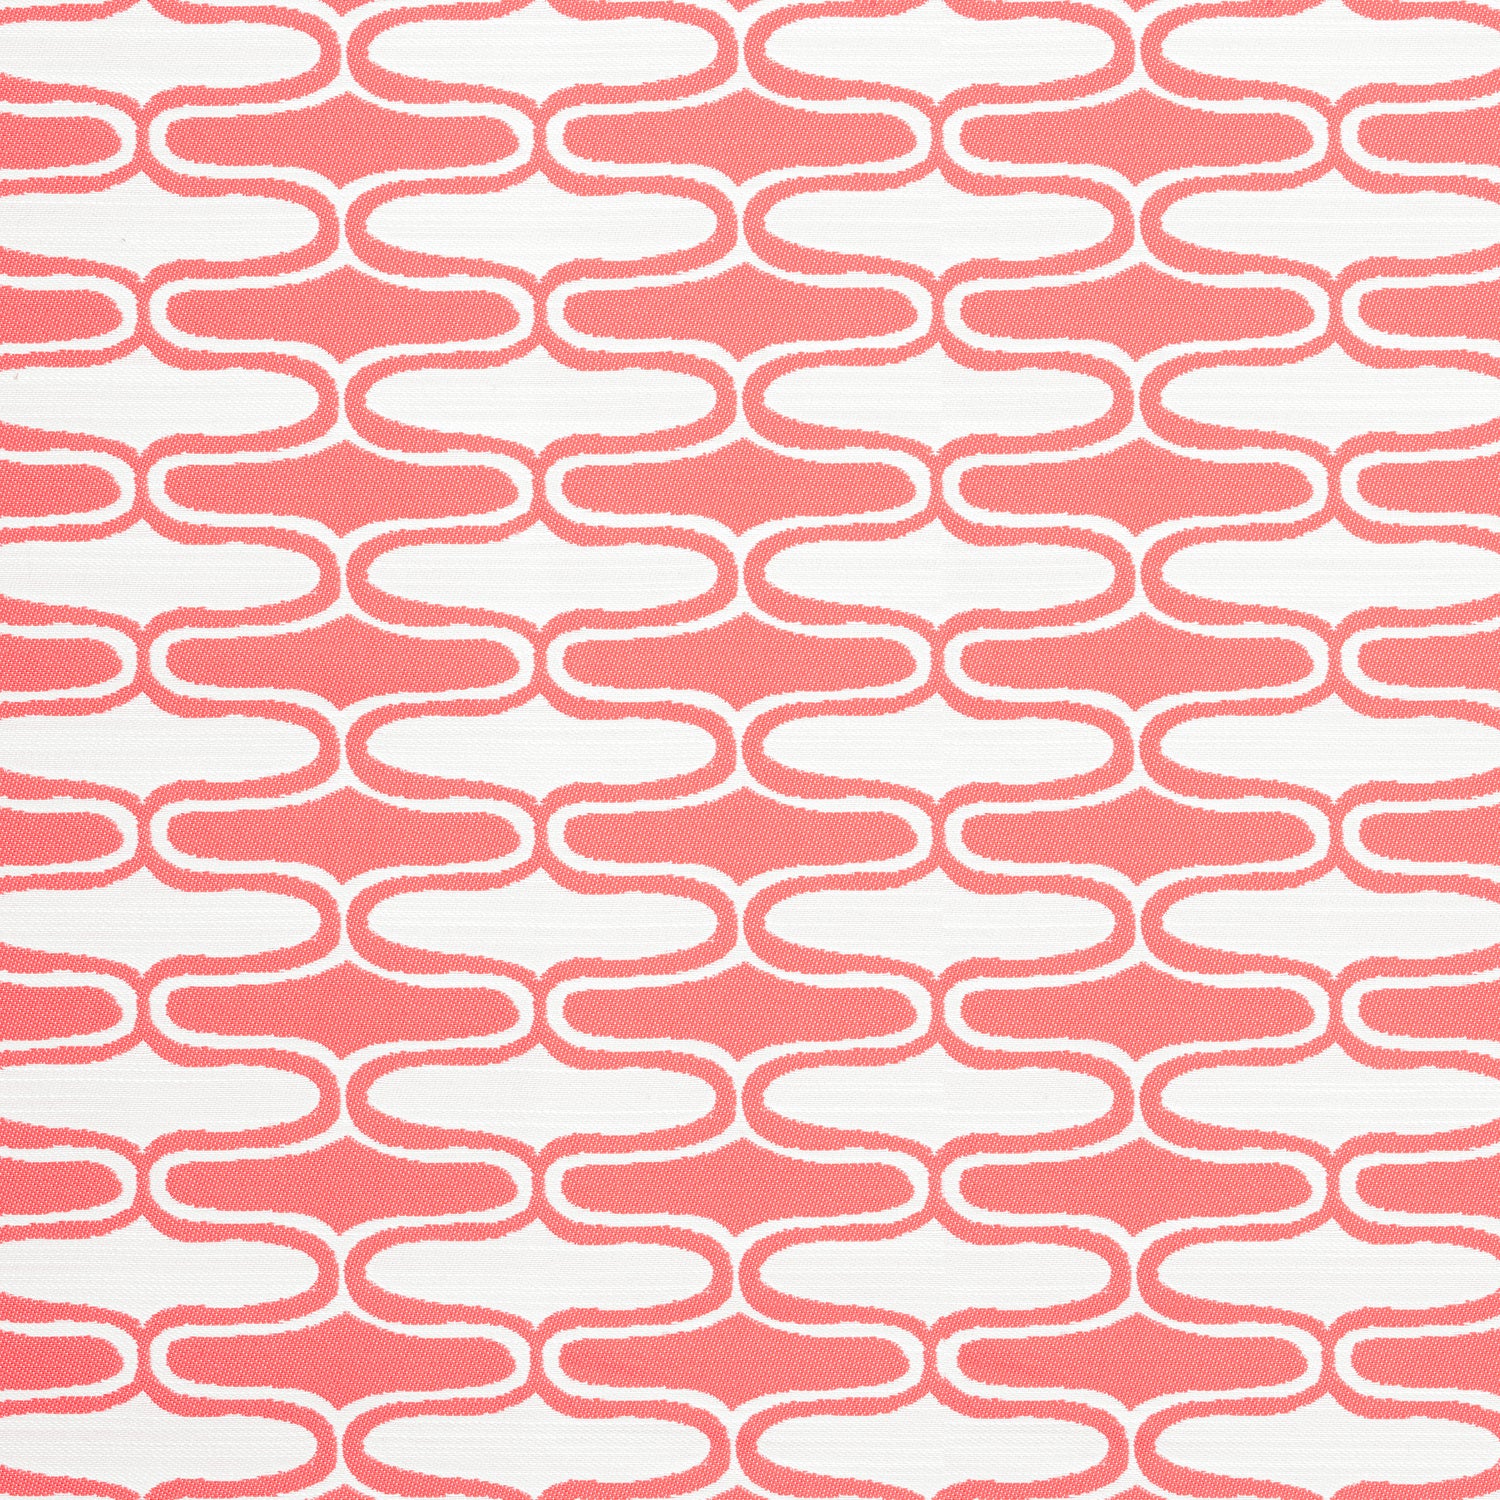 Saraband fabric in coral color - pattern number W8532 - by Thibaut in the Villa collection